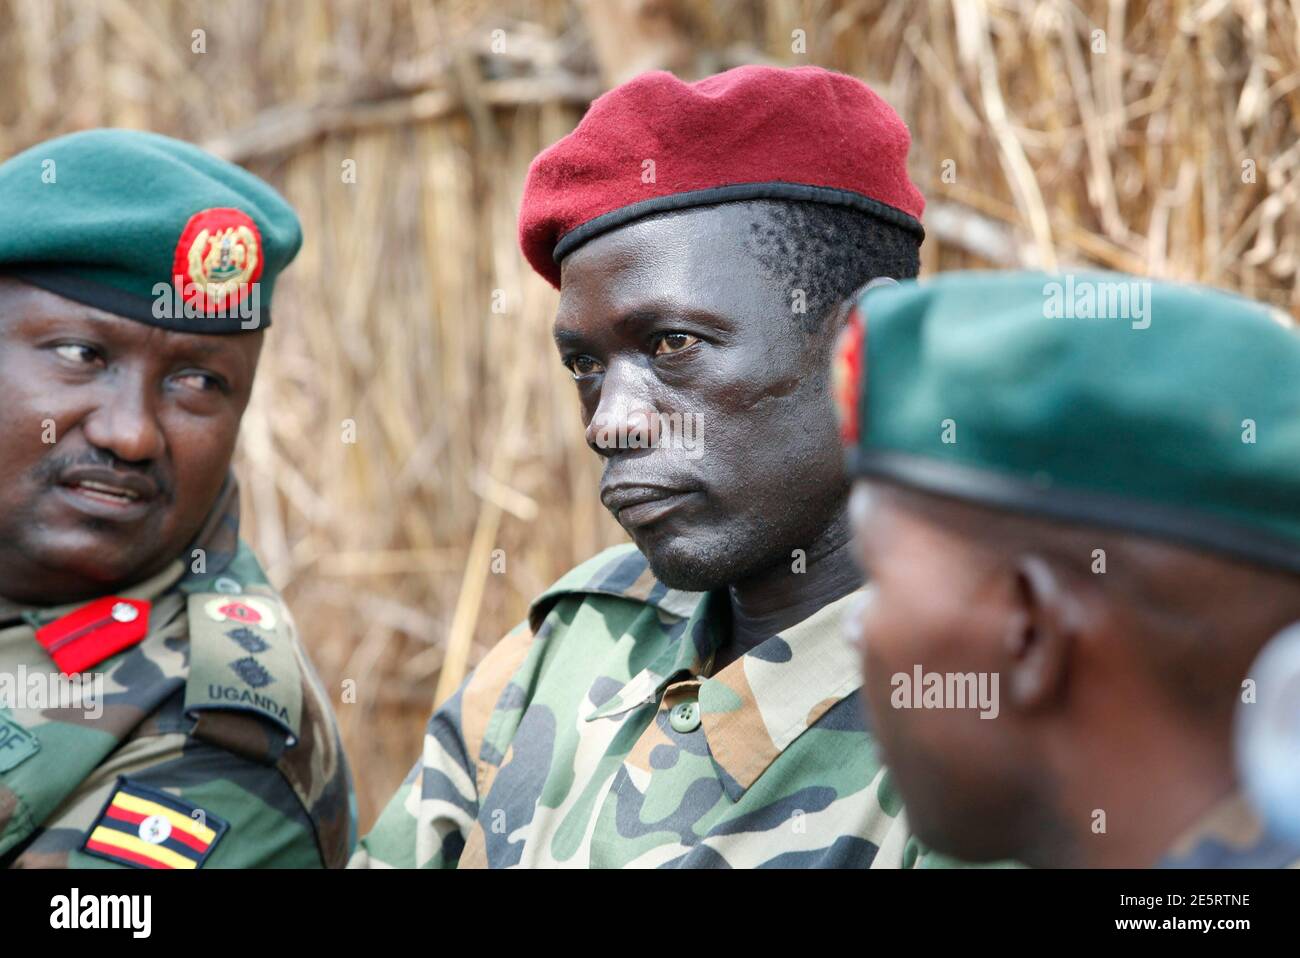 Lord's Resistance Army (LRA) commander Caesar Achellam (C) sits next to Uganda army spokesman Felix Kulyije (R) as he is presented to the media in Djema May 13, 2012, after he was captured by Ugandan soldiers tracking down LRA fugitive leaders at a forest bordering the Central African Republic (CAR) and the Democratic Republic of Congo. Uganda captured Achellam, one of the top five members of the LRA, bringing it a step closer to catching Joseph Kony, the notorious rebel leader accused of war crimes, the military said on Sunday. REUTERS/James Akena (CENTRAL AFRICAN REPUBLIC - Tags: MILITARY PO Stock Photo